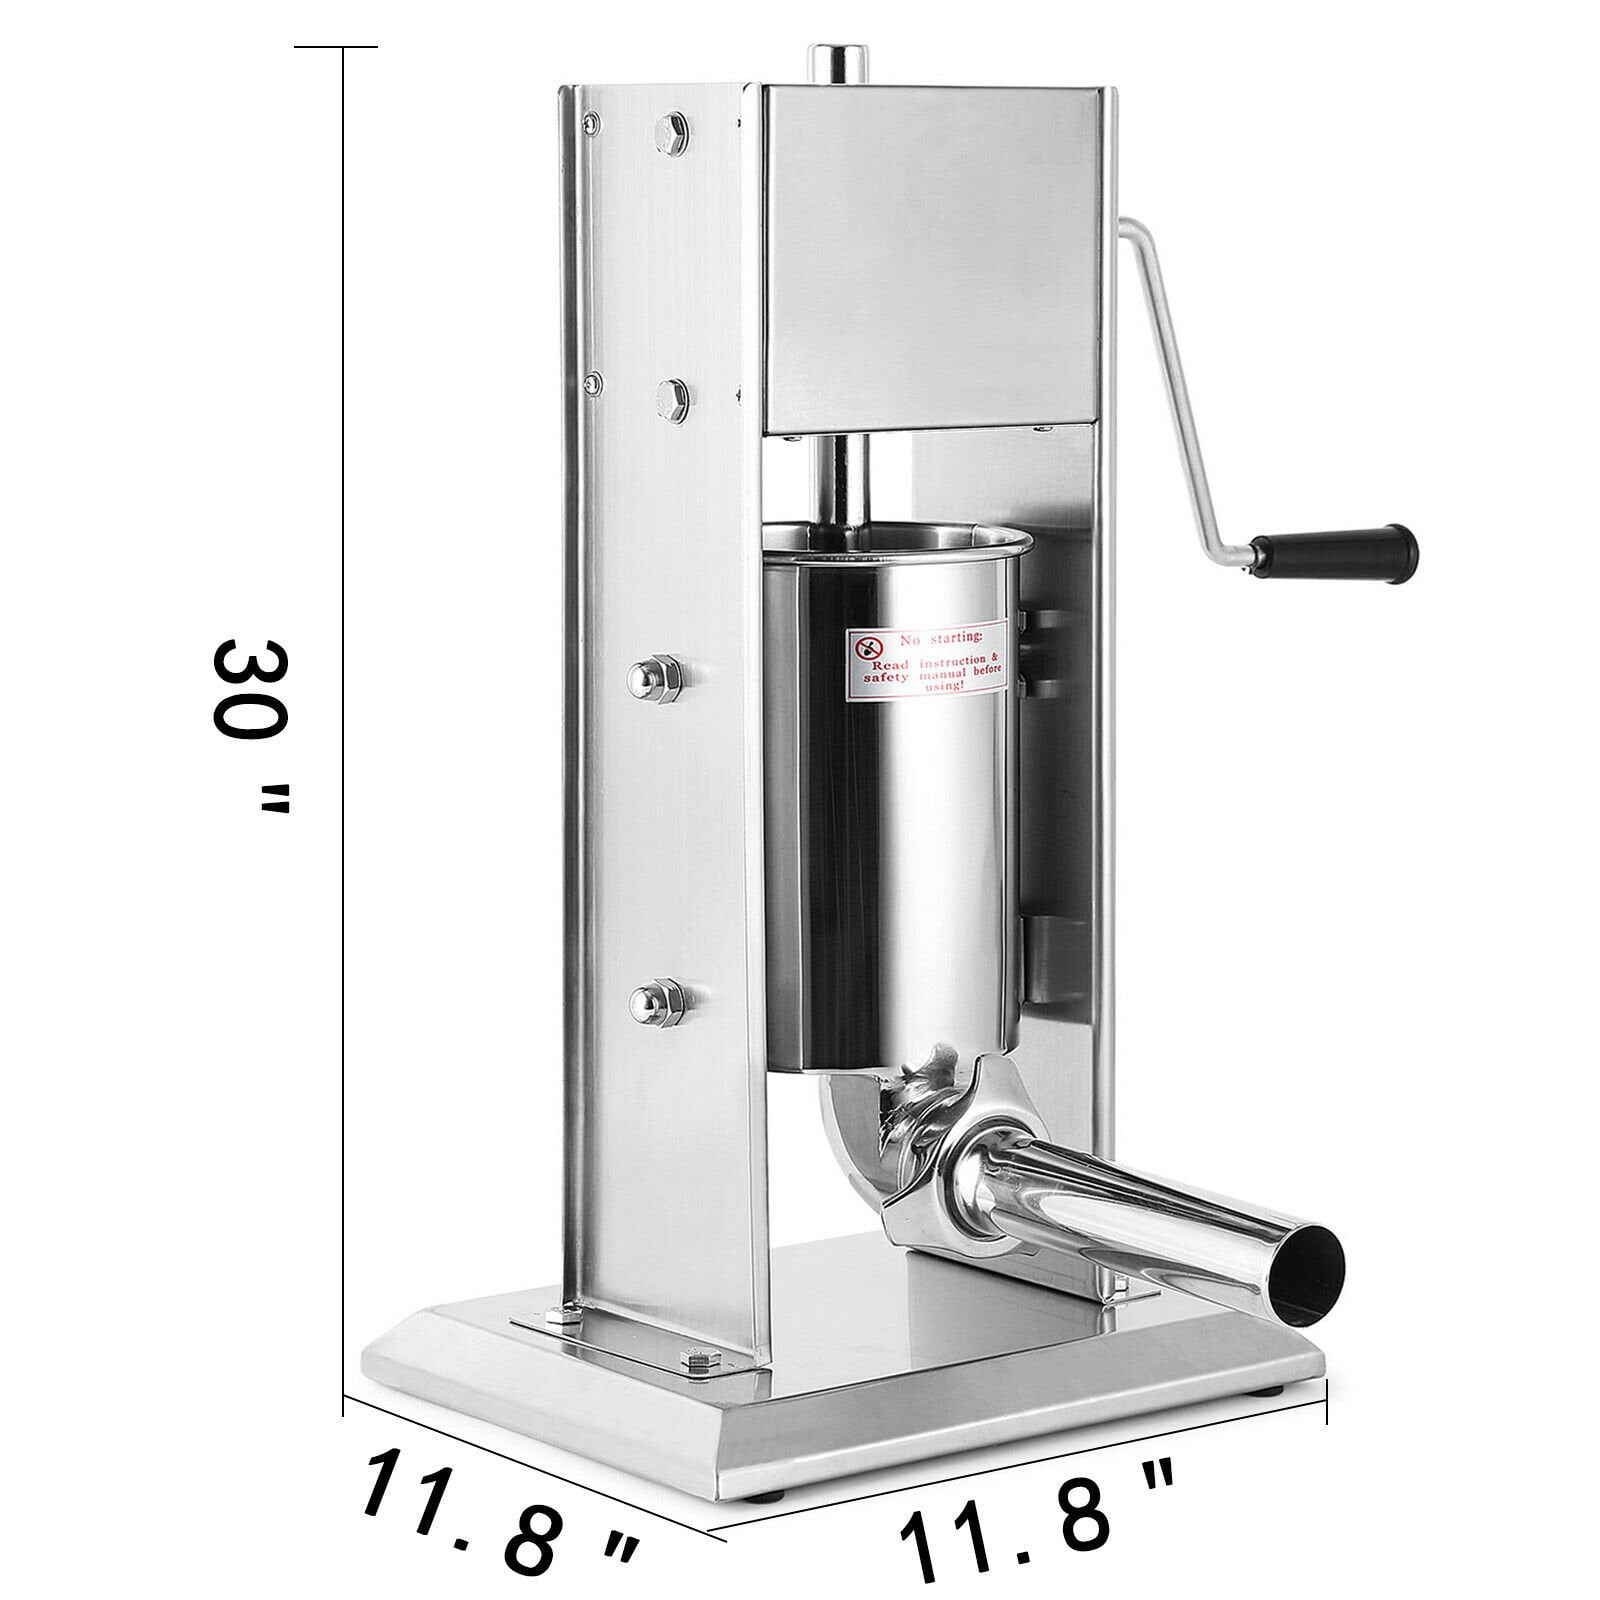 KITGARN Sausage Stuffer Machine 10L Stainless Steel Sausage Filler Horizontal Manual Sausage Meat Stuffer Machine for Making Hot Dog Sausages Bratwurst Suitable for Home and Commercial Use 